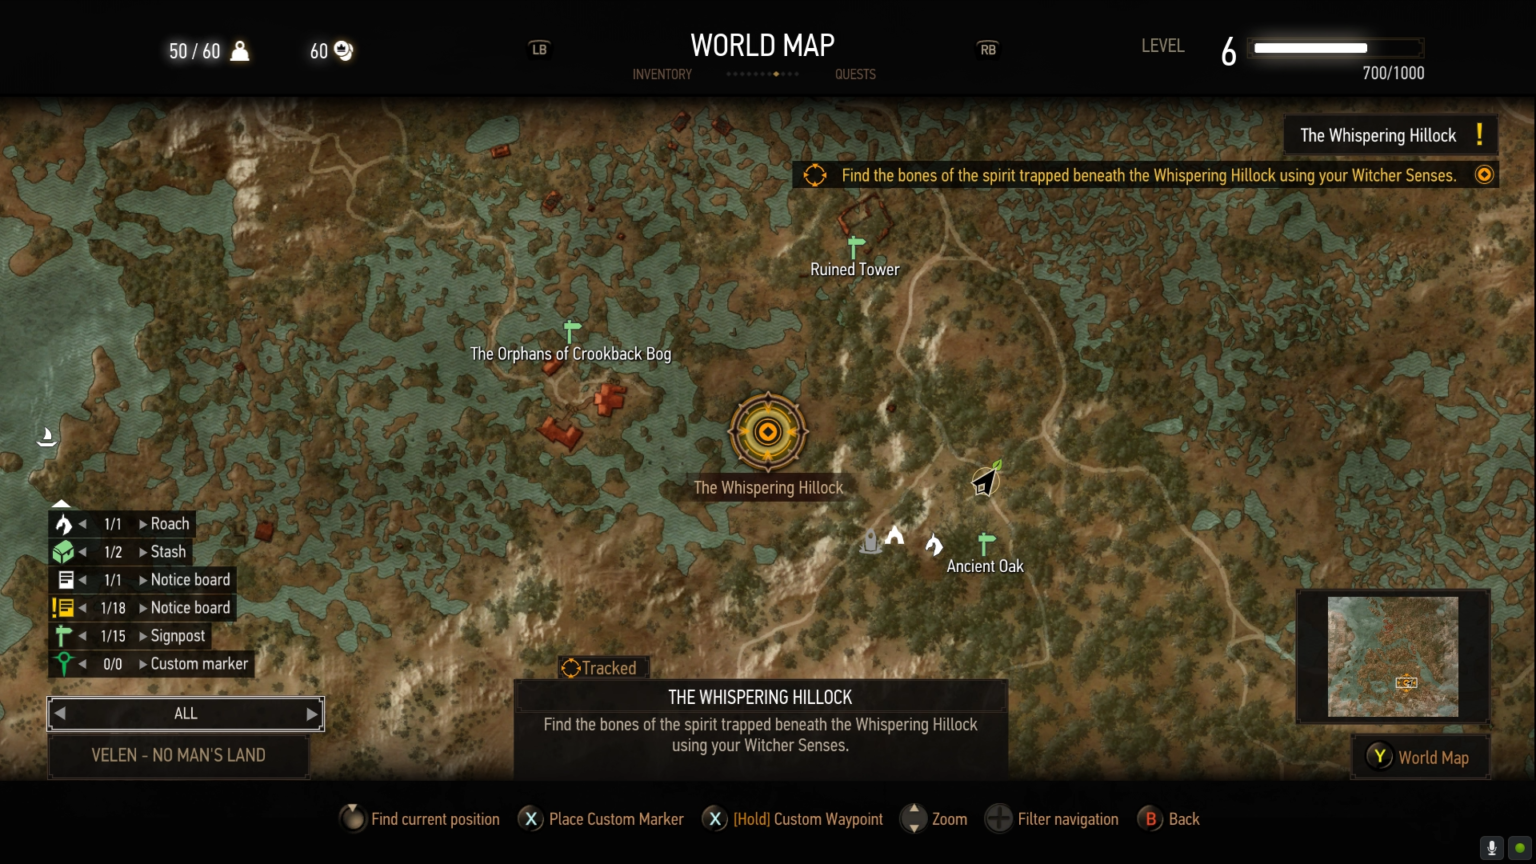 the-whispering-hillock-secondary-quest-the-witcher3-wild-hunt-guide-walkthrough